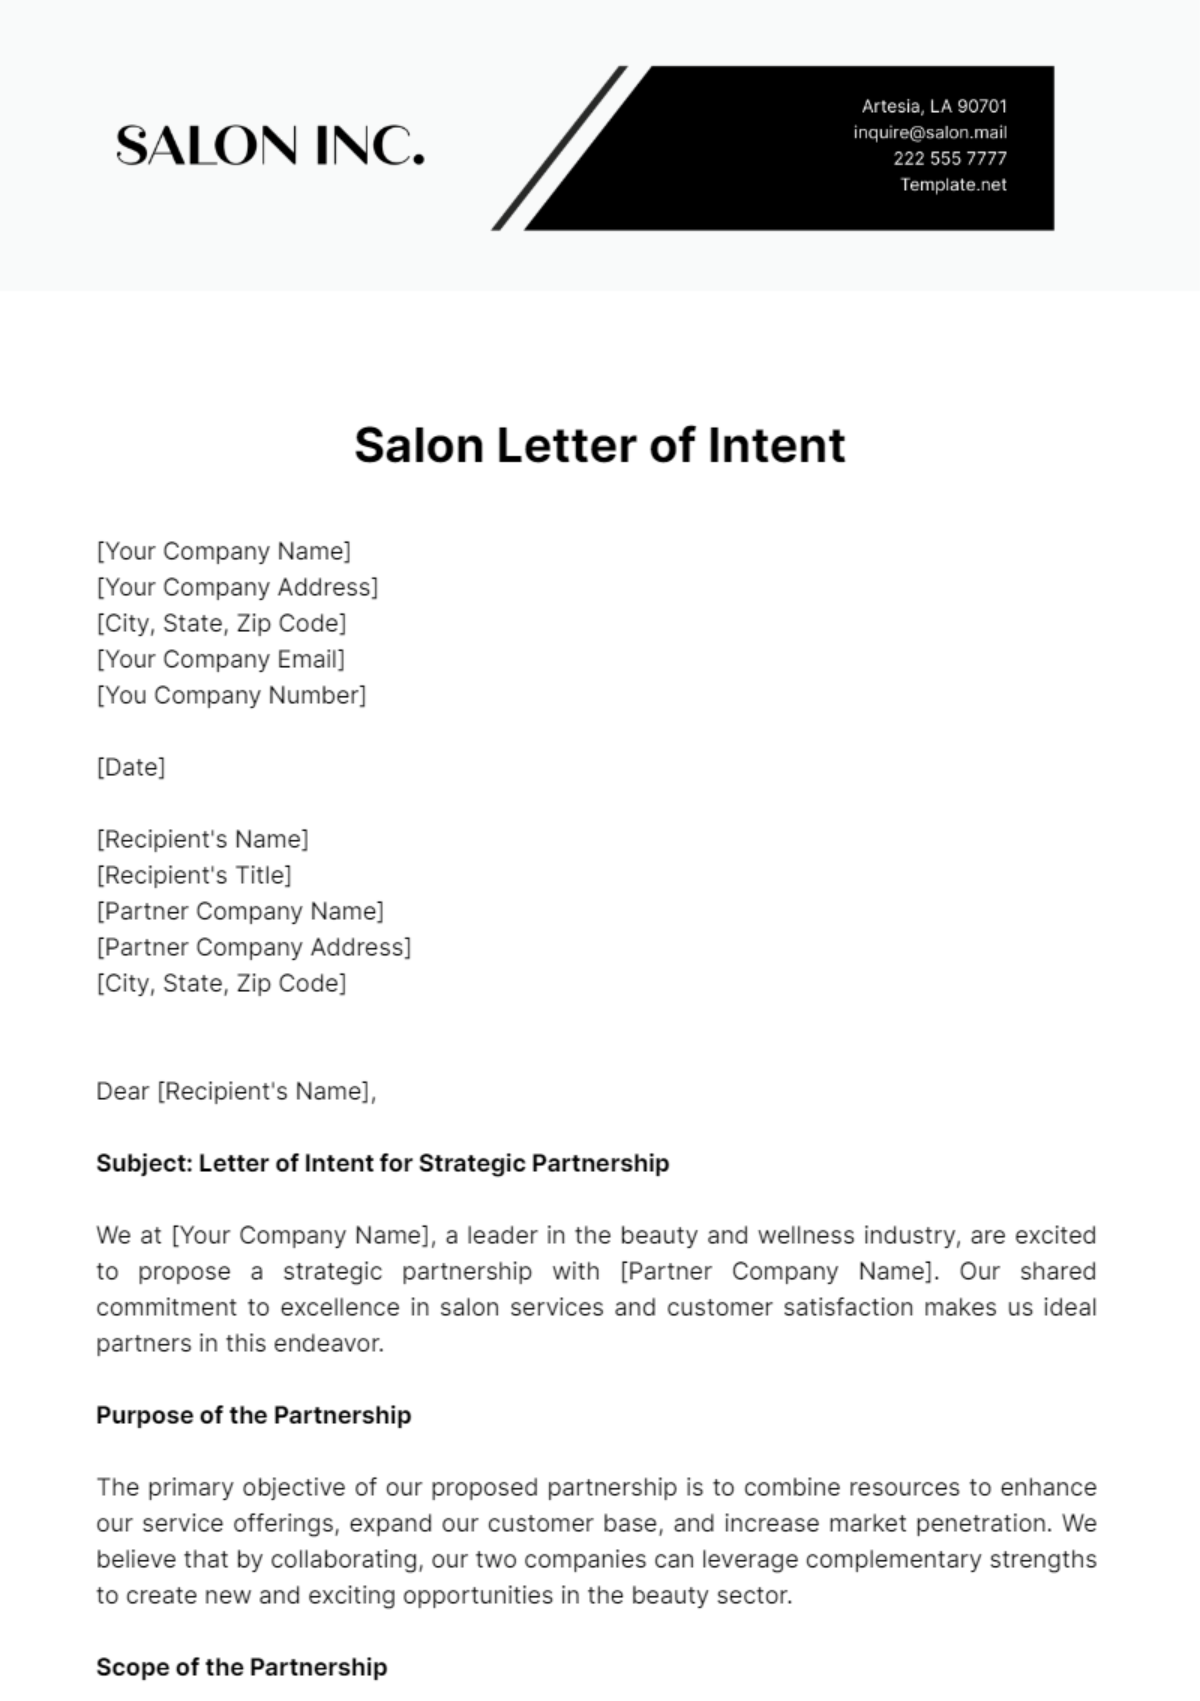 Free Salon Letter of Intent Template